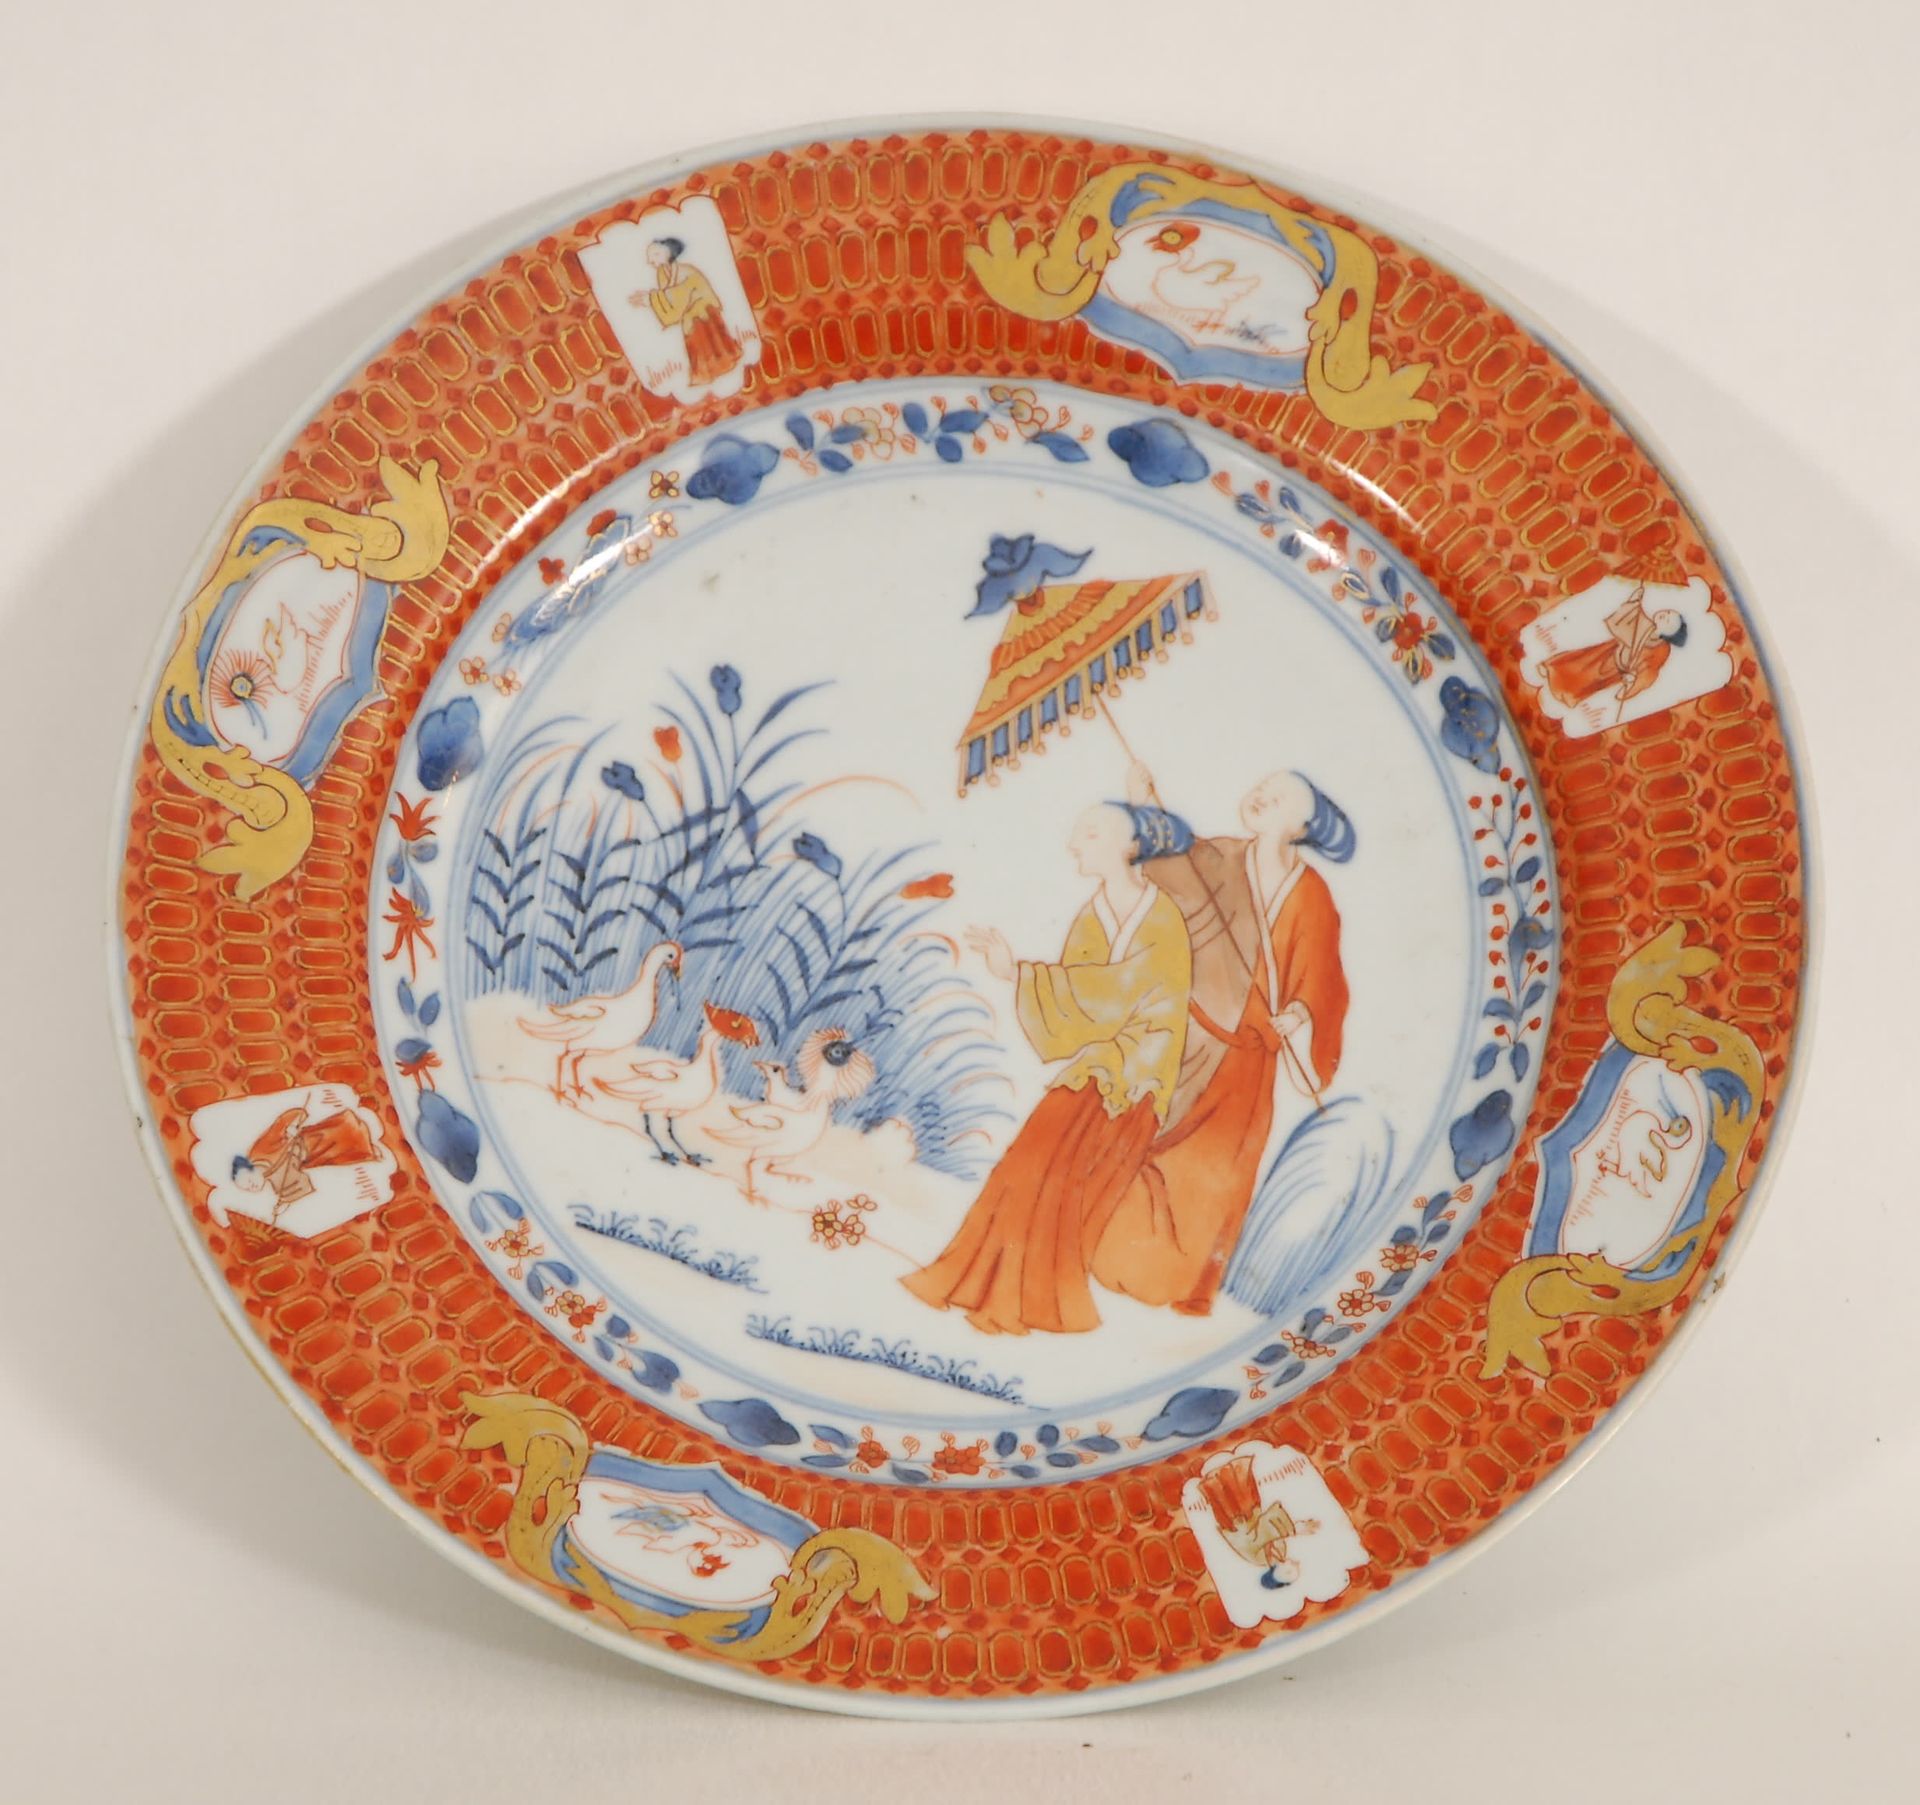 Null Dame au parasol dish
Painted after Cornelis Pronk. China, 18th century.
Dia&hellip;